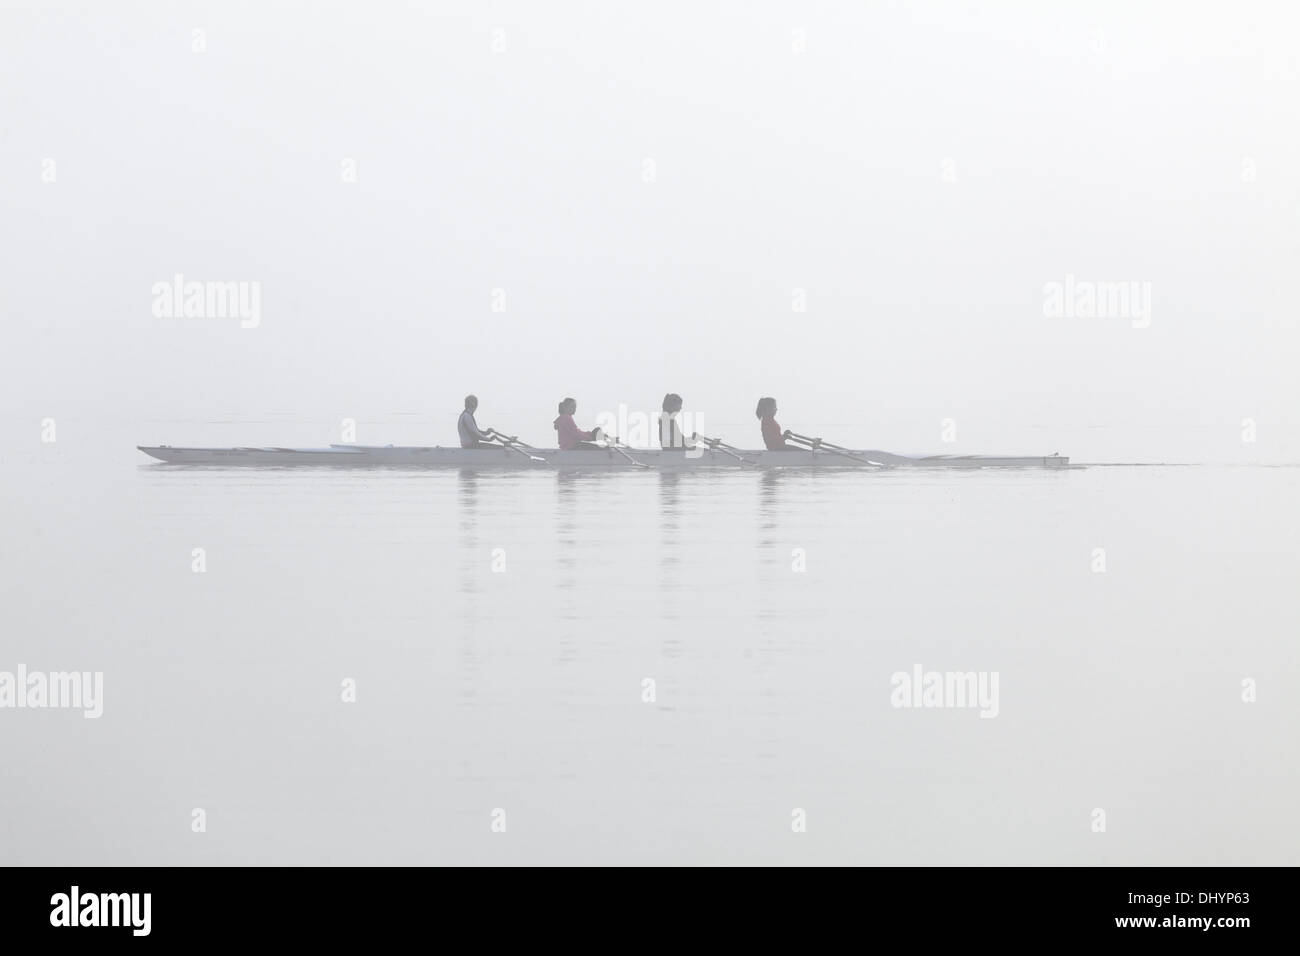 Castle Semple Visitor Centre, Lochwinnoch, Renfrewshire, Scotland, UK, Sunday, 17th November, 2013. A quad scull rowing team training in the early morning mist on Castle Semple Loch in Clyde Muirshiel Regional Park Stock Photo